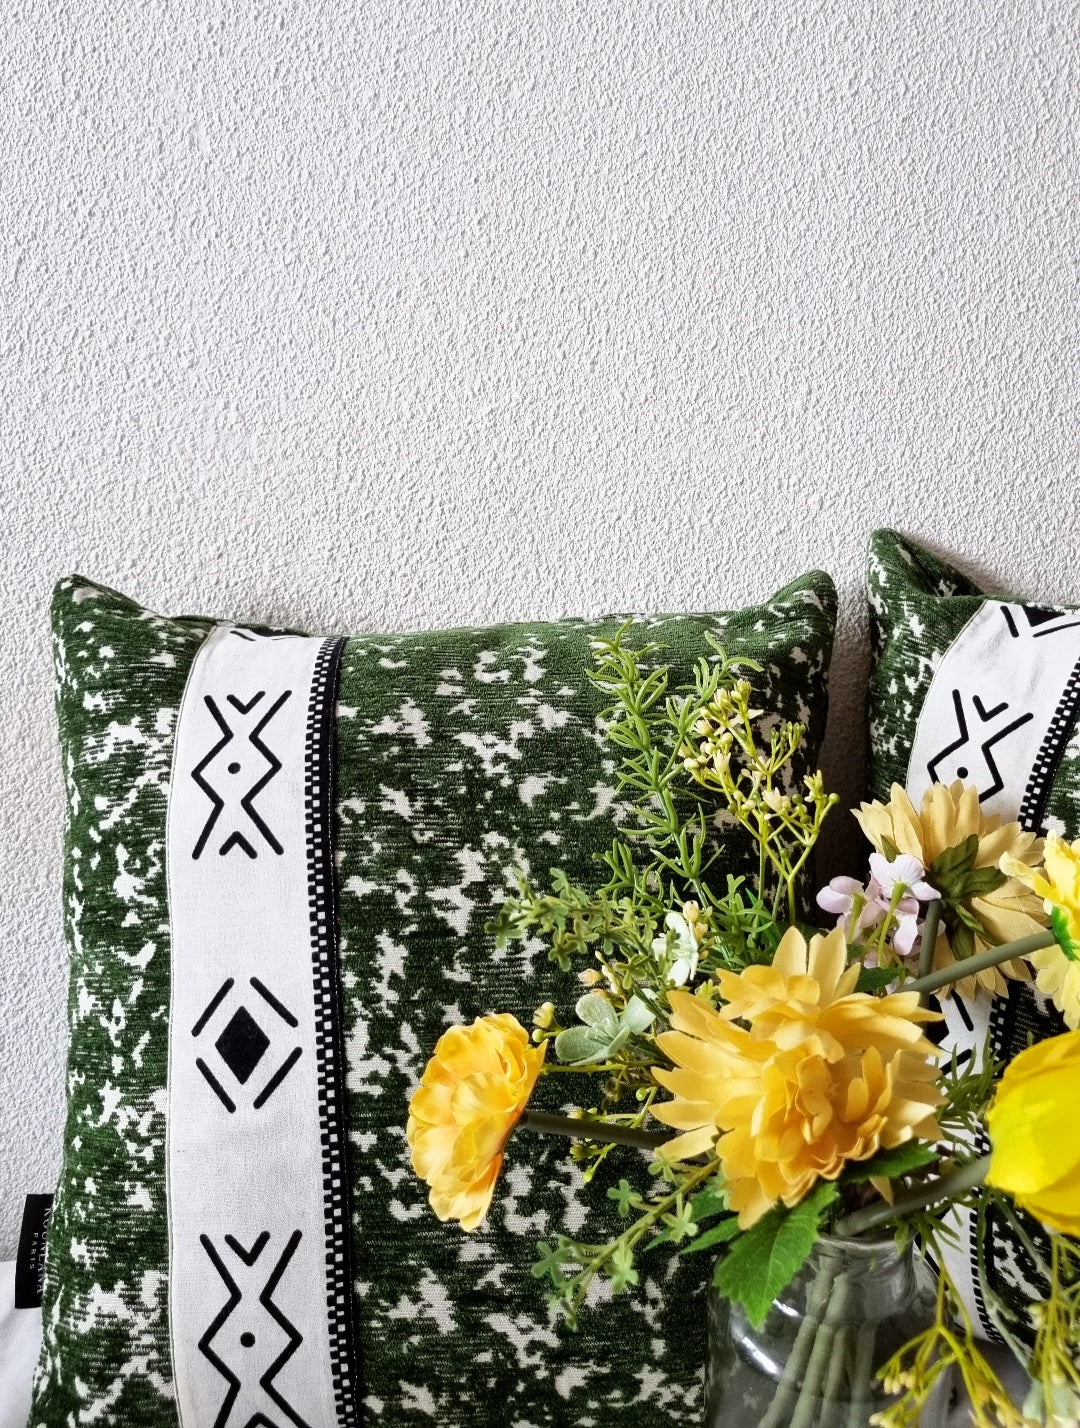 inse-collection-green-cushion-yellow-flowers